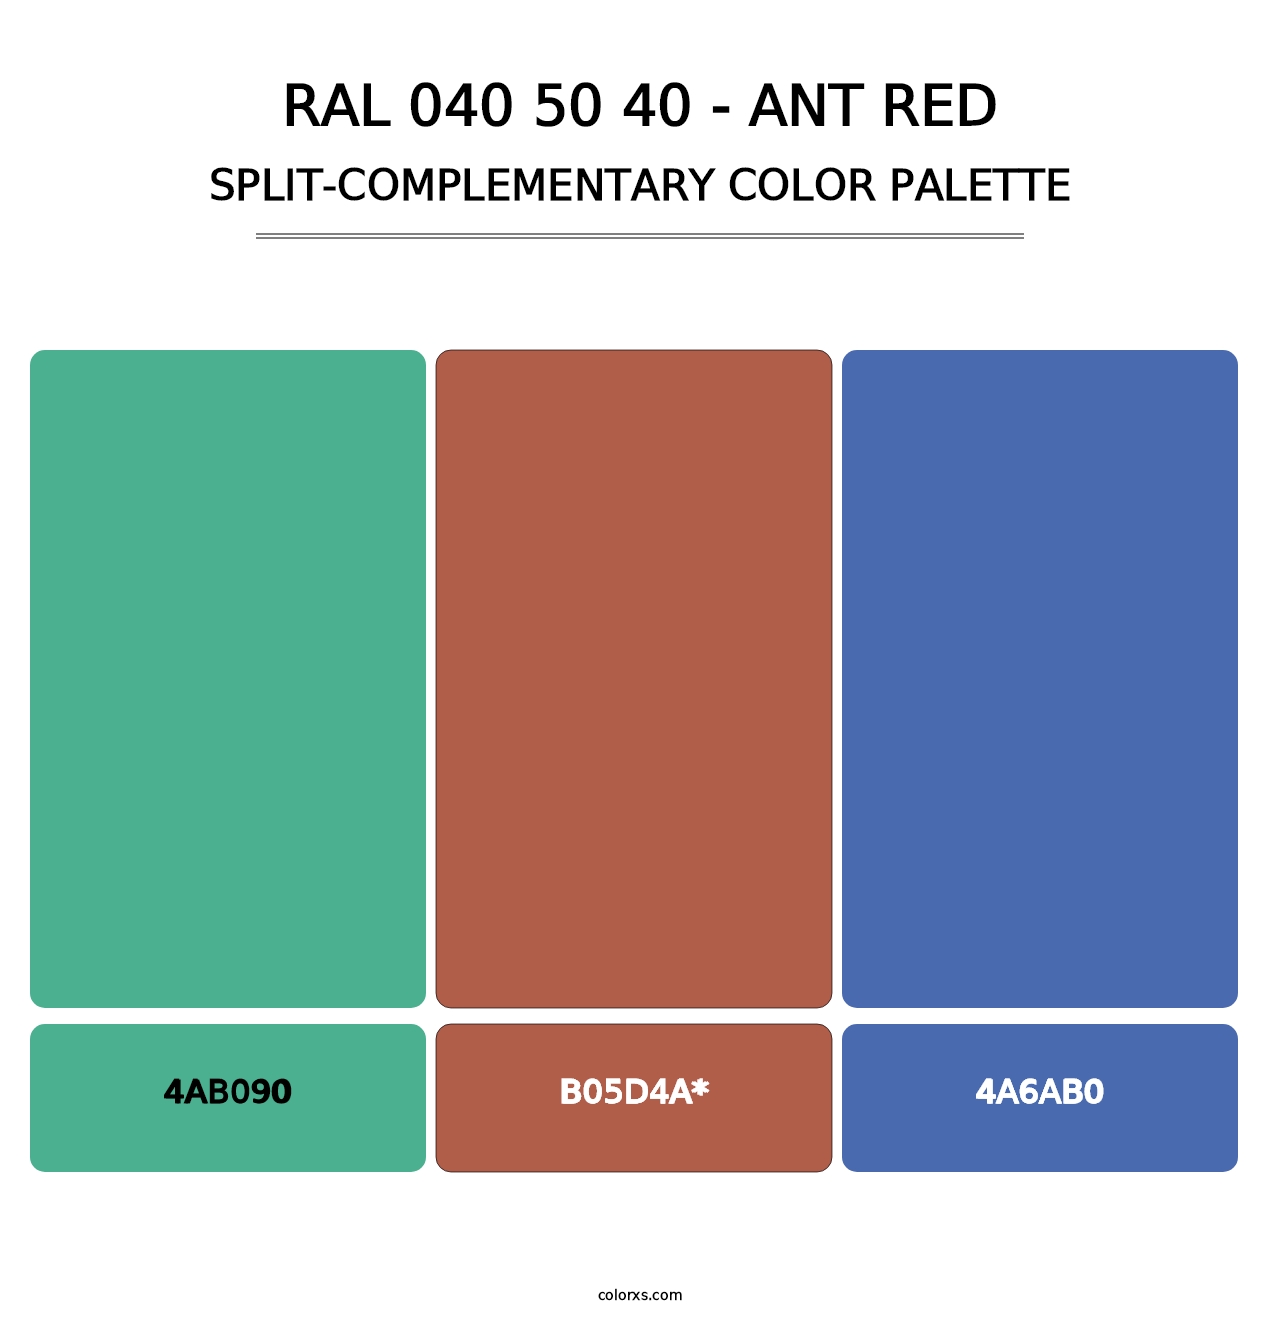 RAL 040 50 40 - Ant Red - Split-Complementary Color Palette